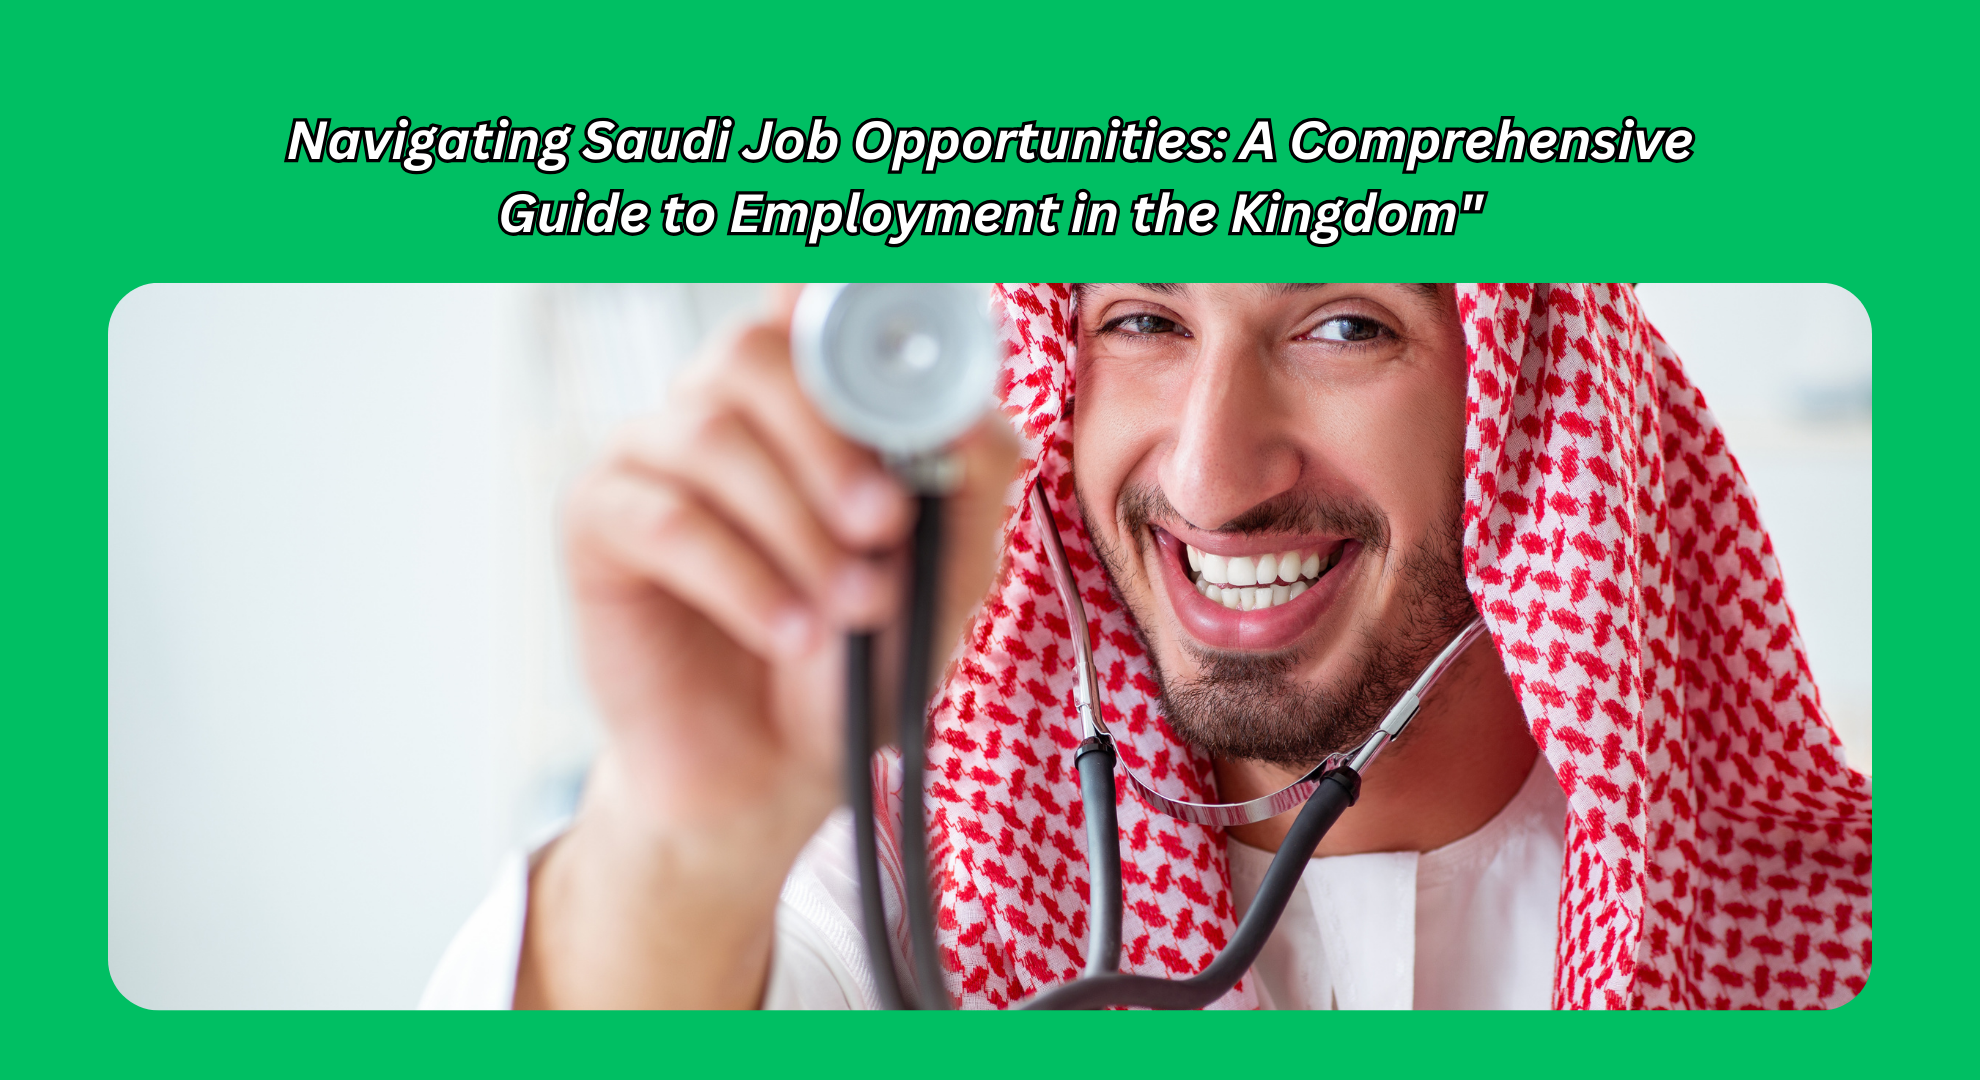 Navigating Saudi Job Opportunities: A Comprehensive Guide to Employment in the Kingdom"